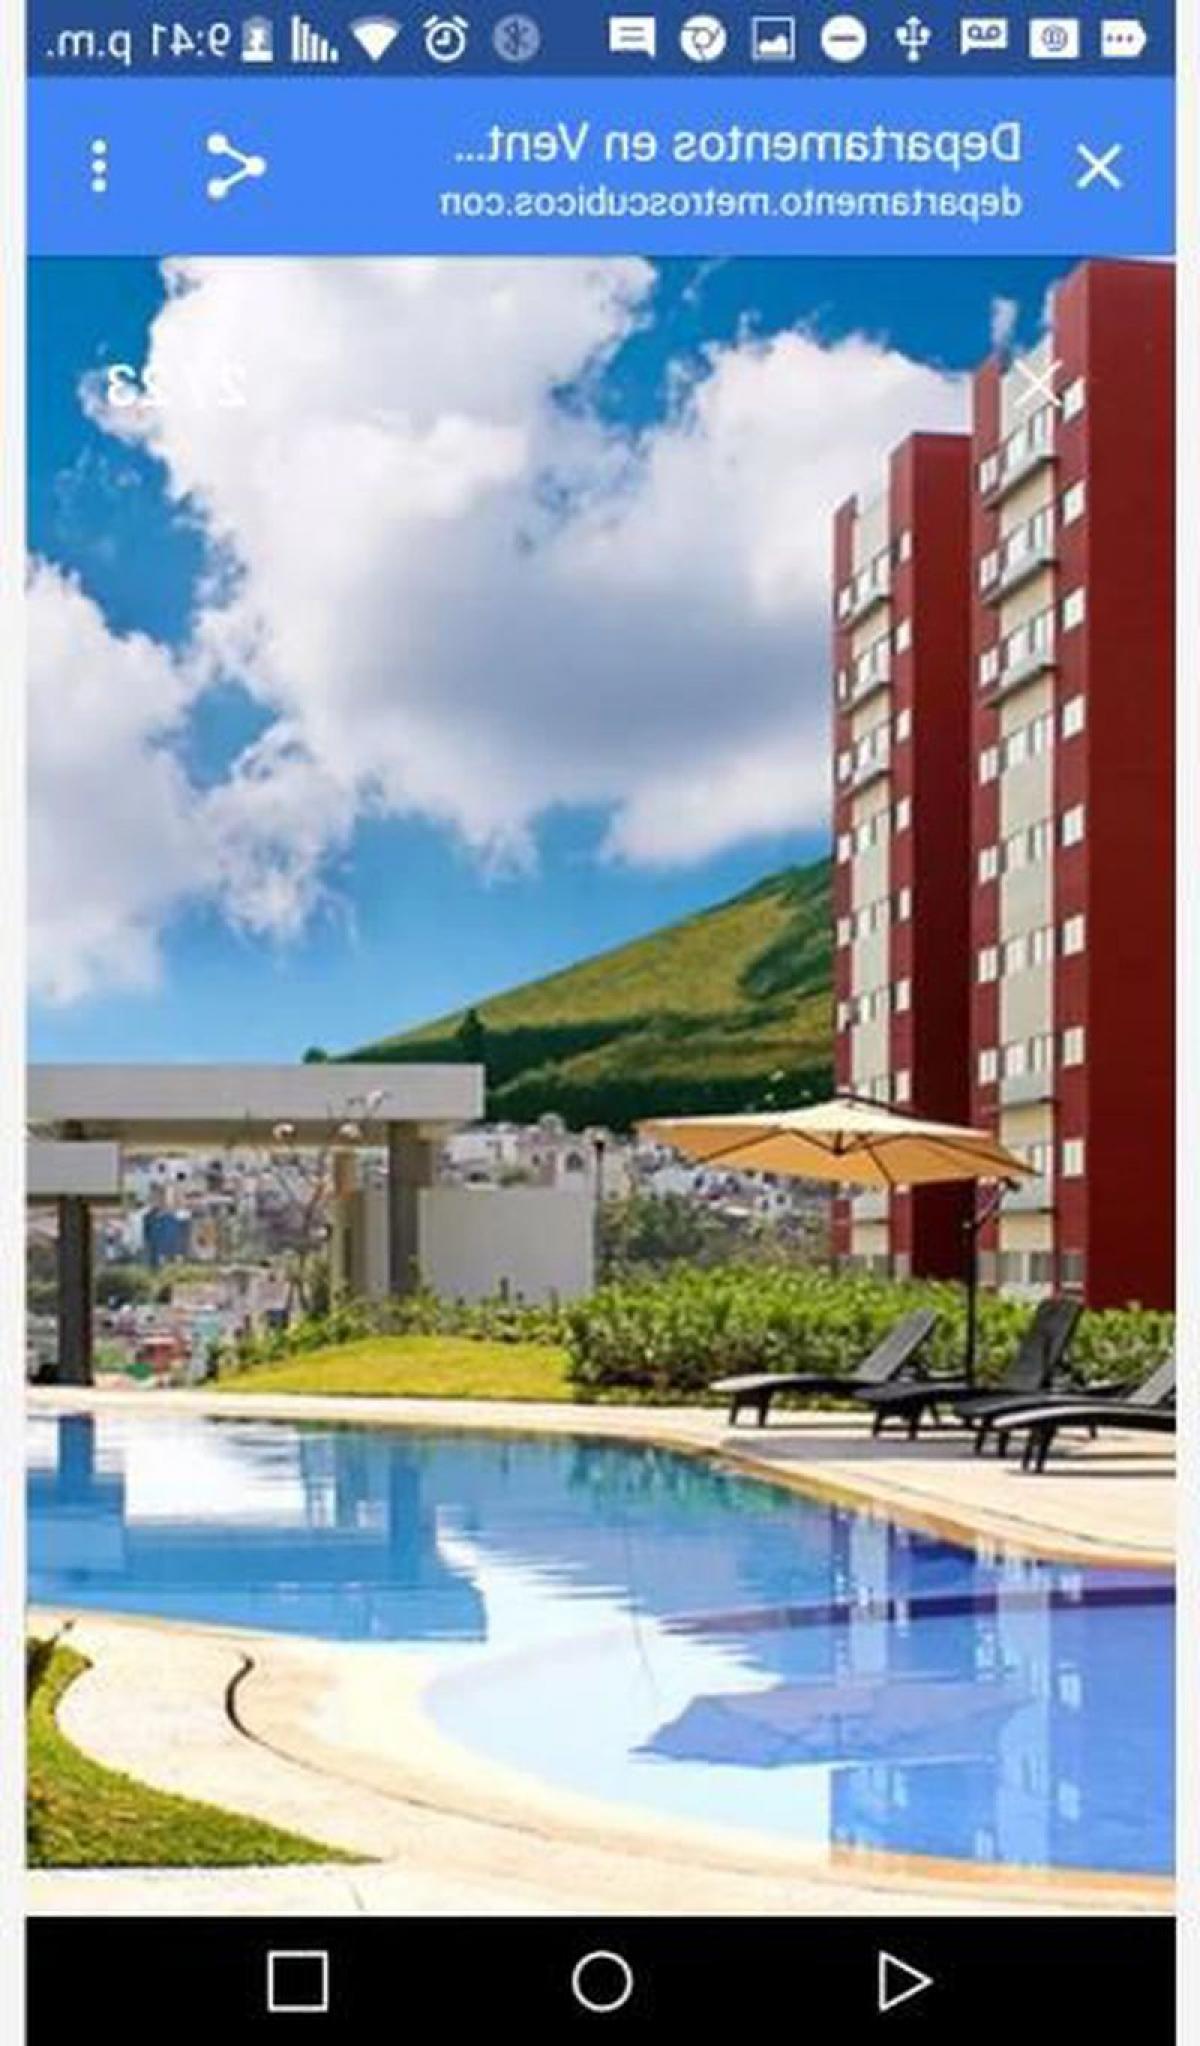 Picture of Apartment For Sale in San Pedro Tlaquepaque, Jalisco, Mexico